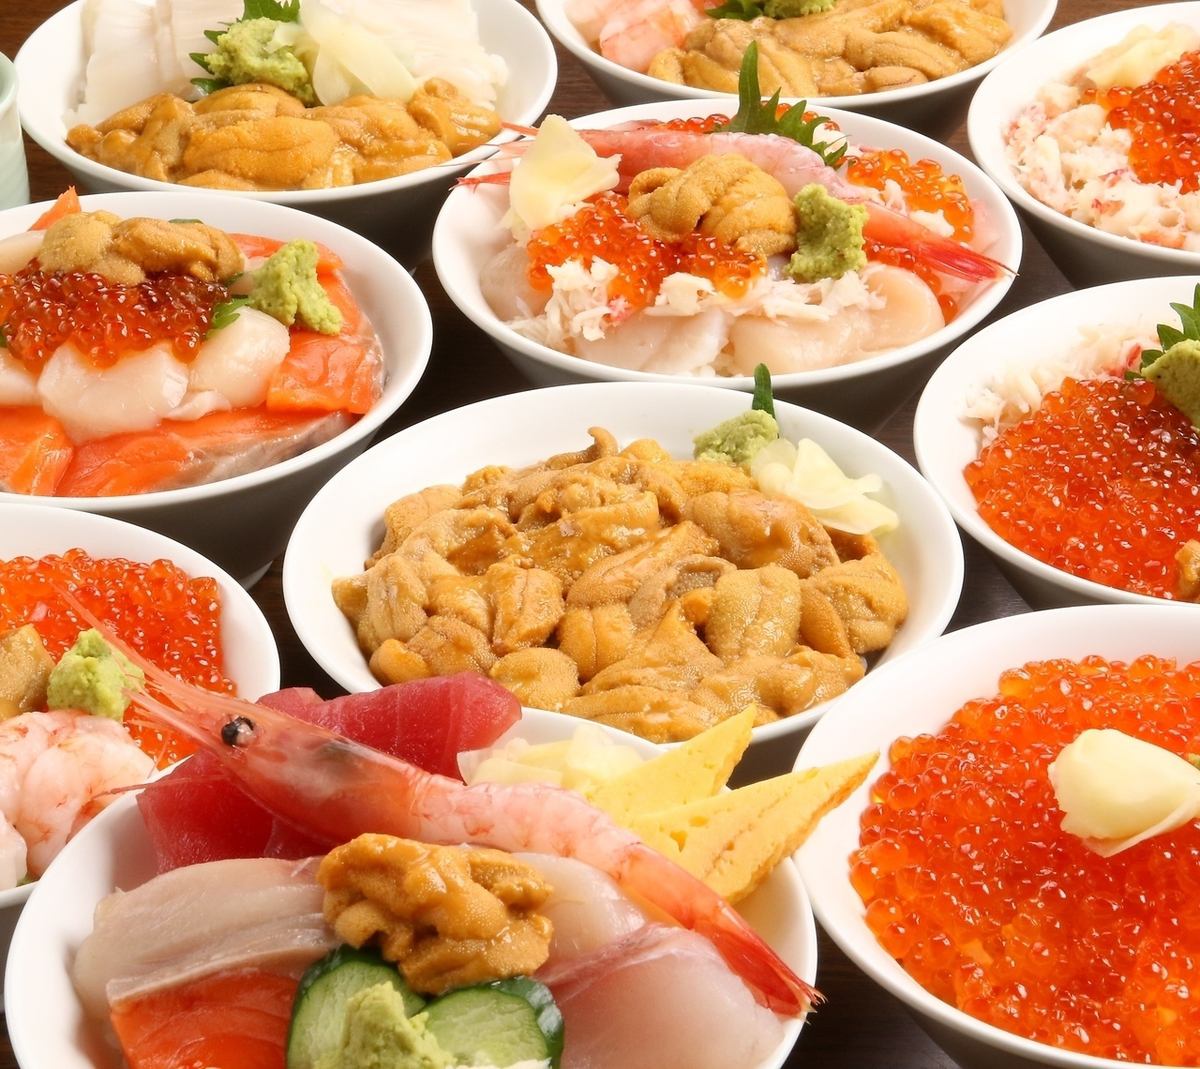 Equipped with a parking lot! You can enjoy a wide variety of seafood rice bowls♪ Perfect for a drive or sightseeing!